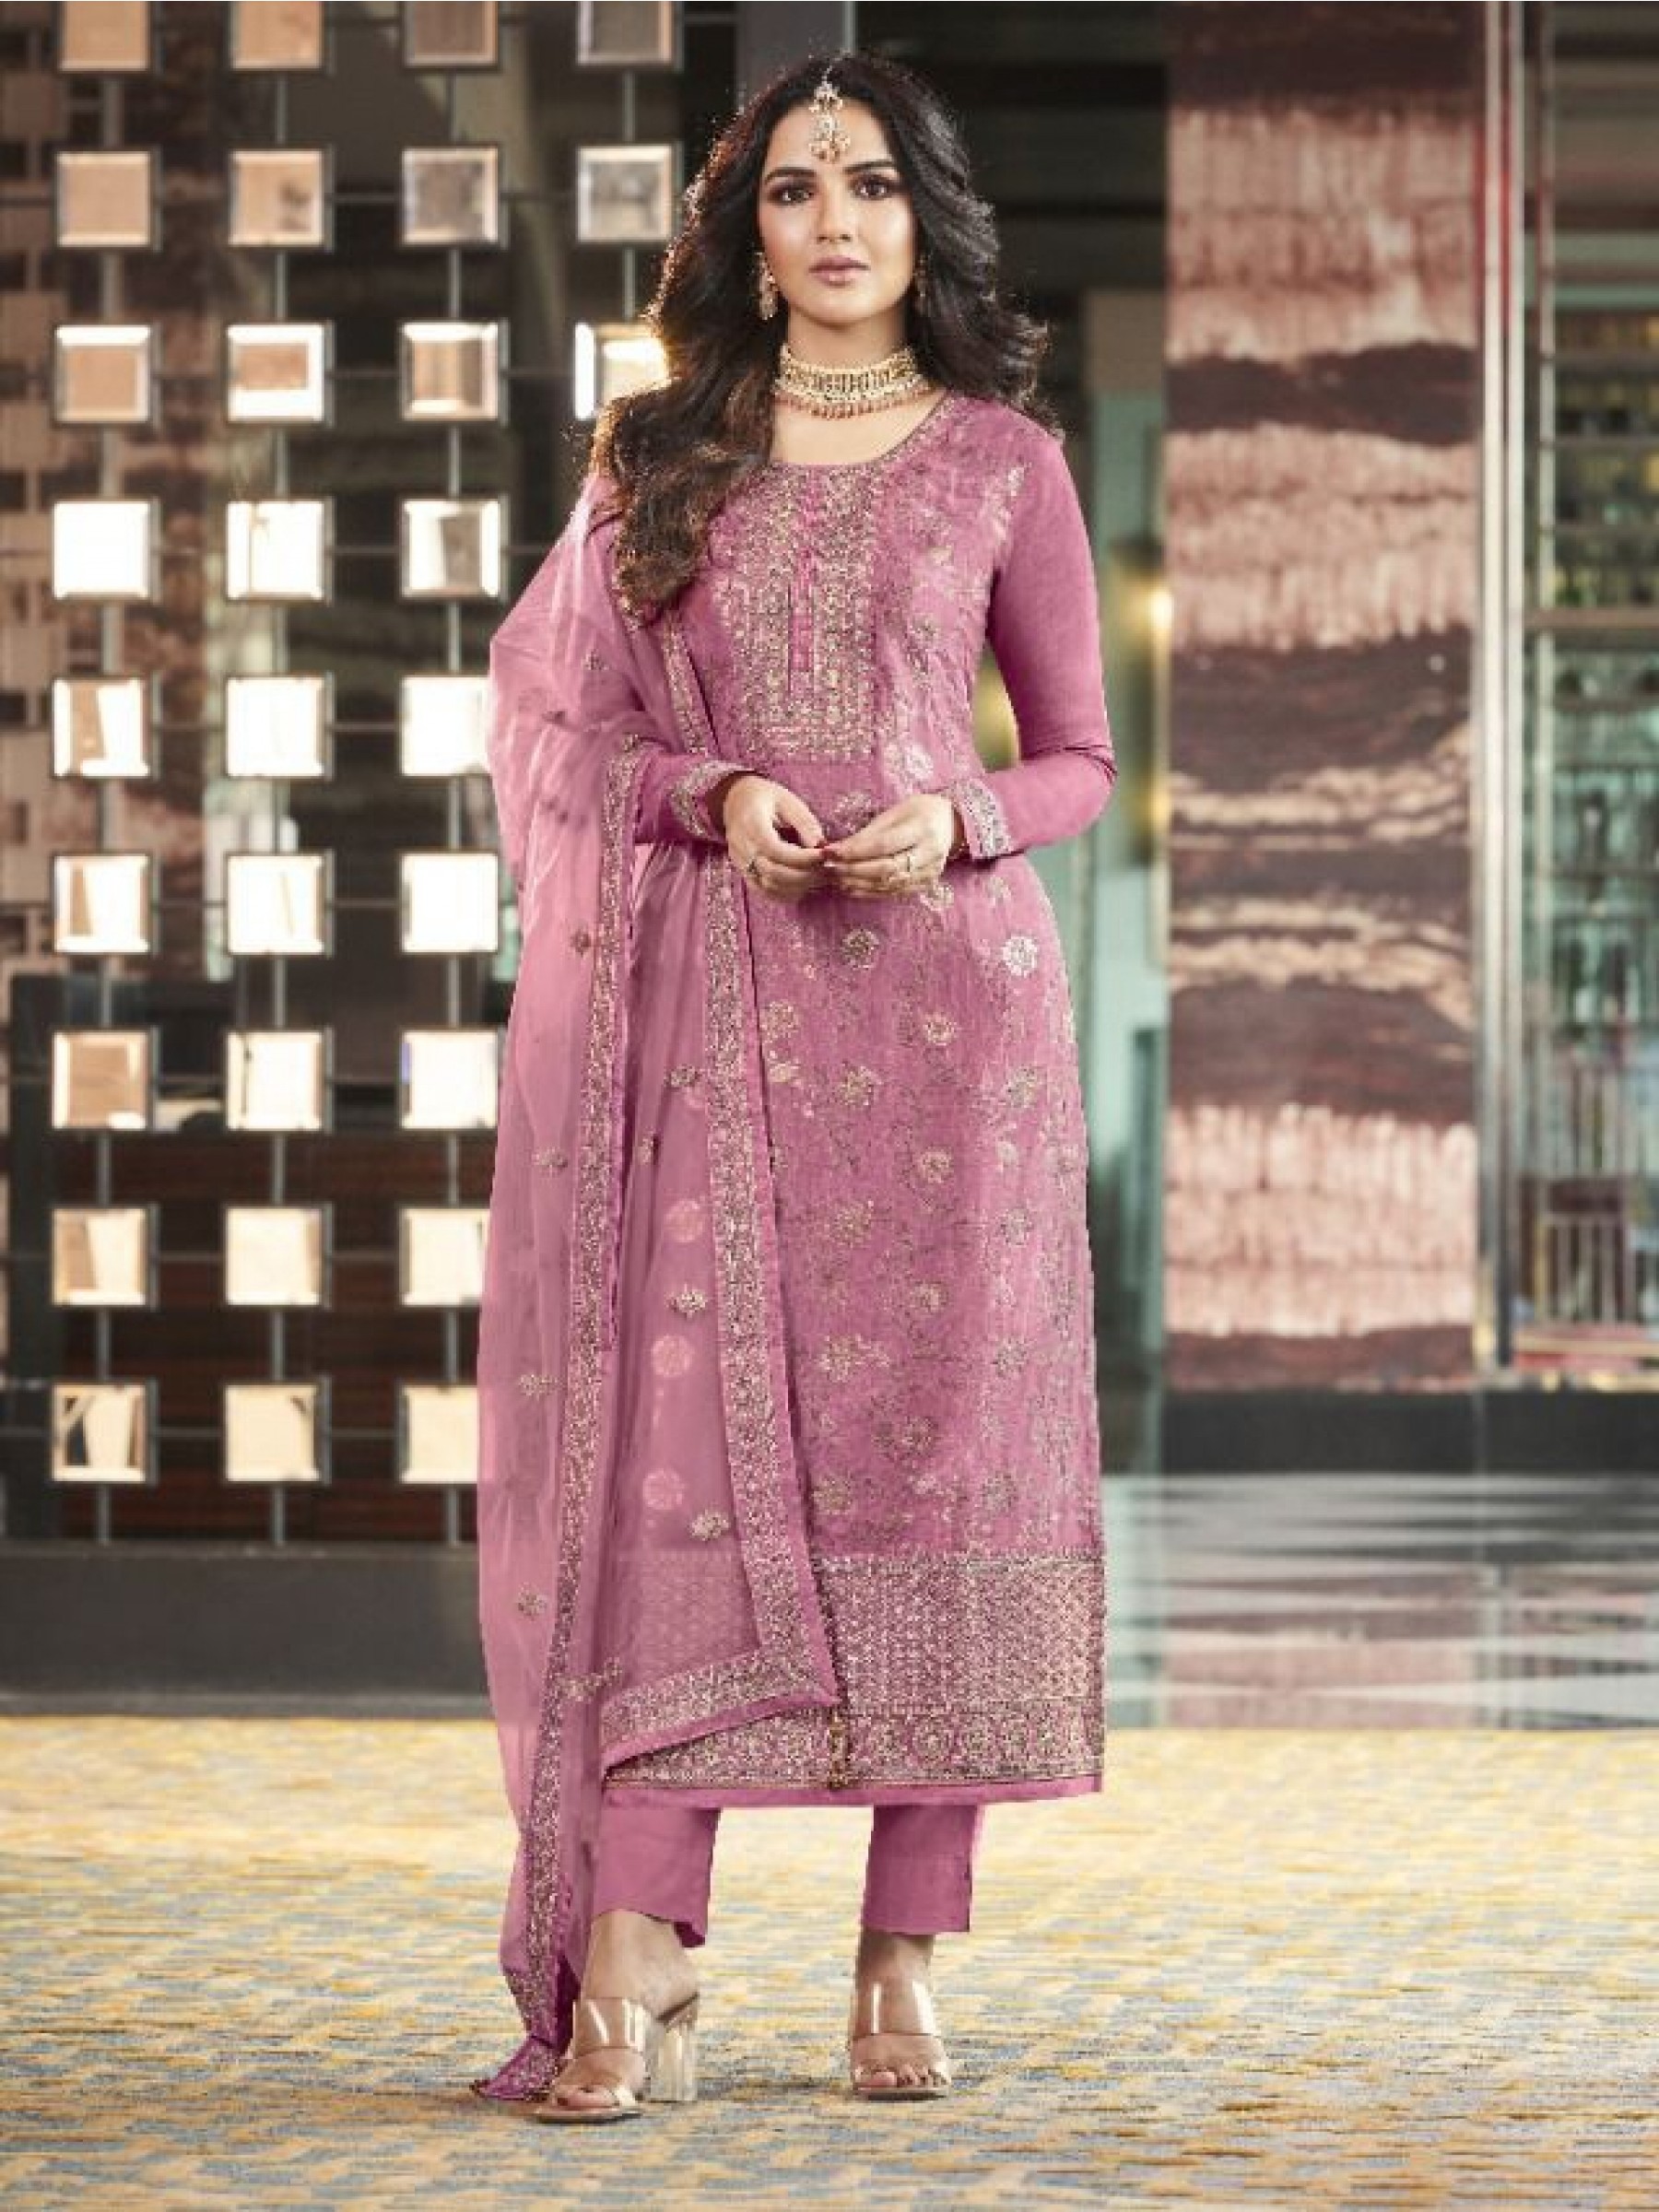 Pure Dola Jacquard   Silk Party Wear Suit in Pink Color with Embroidery Work